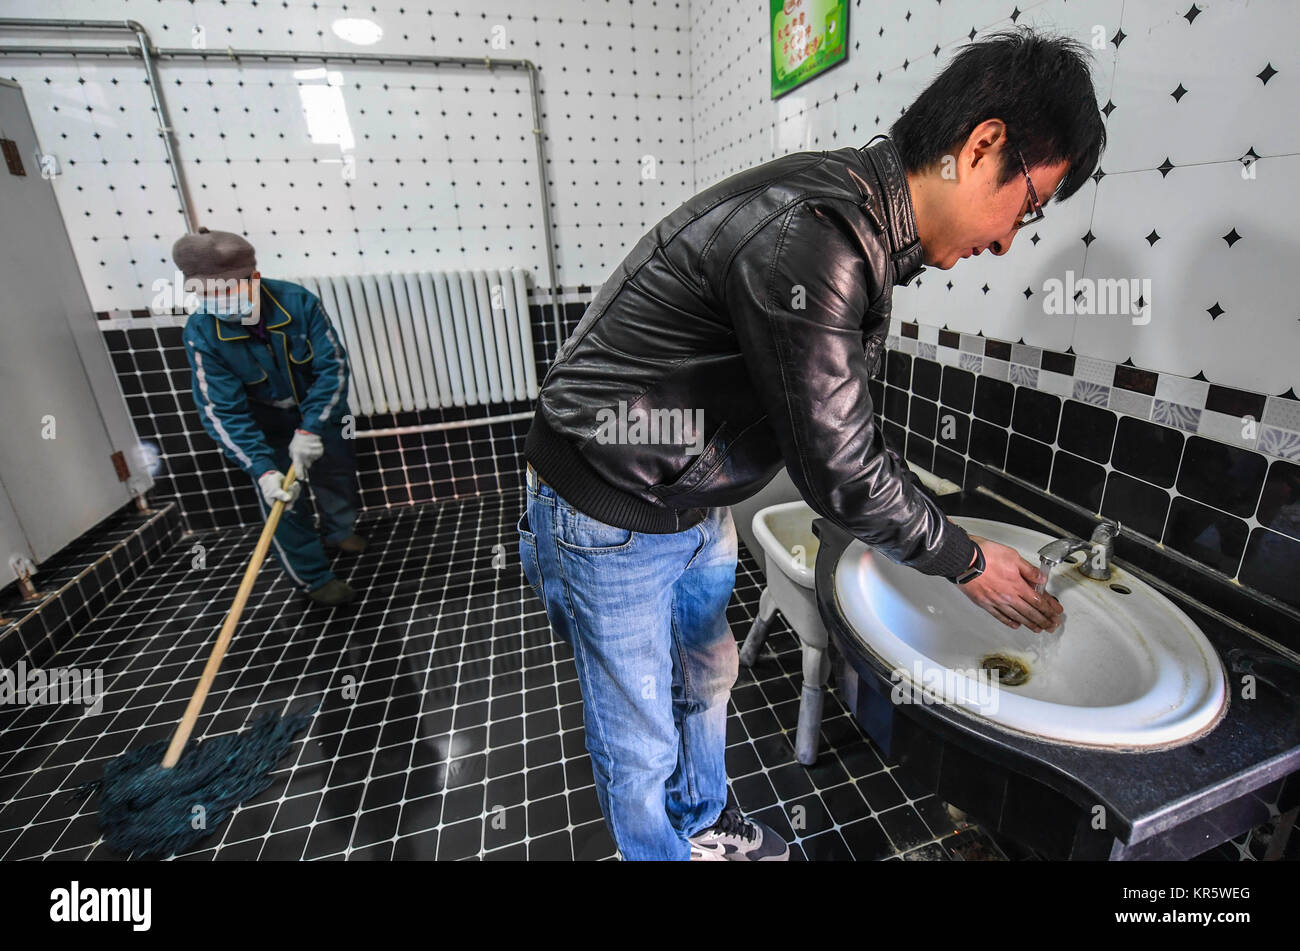 (171218) -- DACHANG, Dec. 18, 2017 (Xinhua) -- A man washes hands at a public toilet in Dachang Hui Autonomous County, north China's Hebei Province, Dec. 18, 2017. Dachang has added cleaners to ensure the cleaness of public restrooms in the county. (Xinhua/Li Xiaoguo) (xzy) Stock Photo